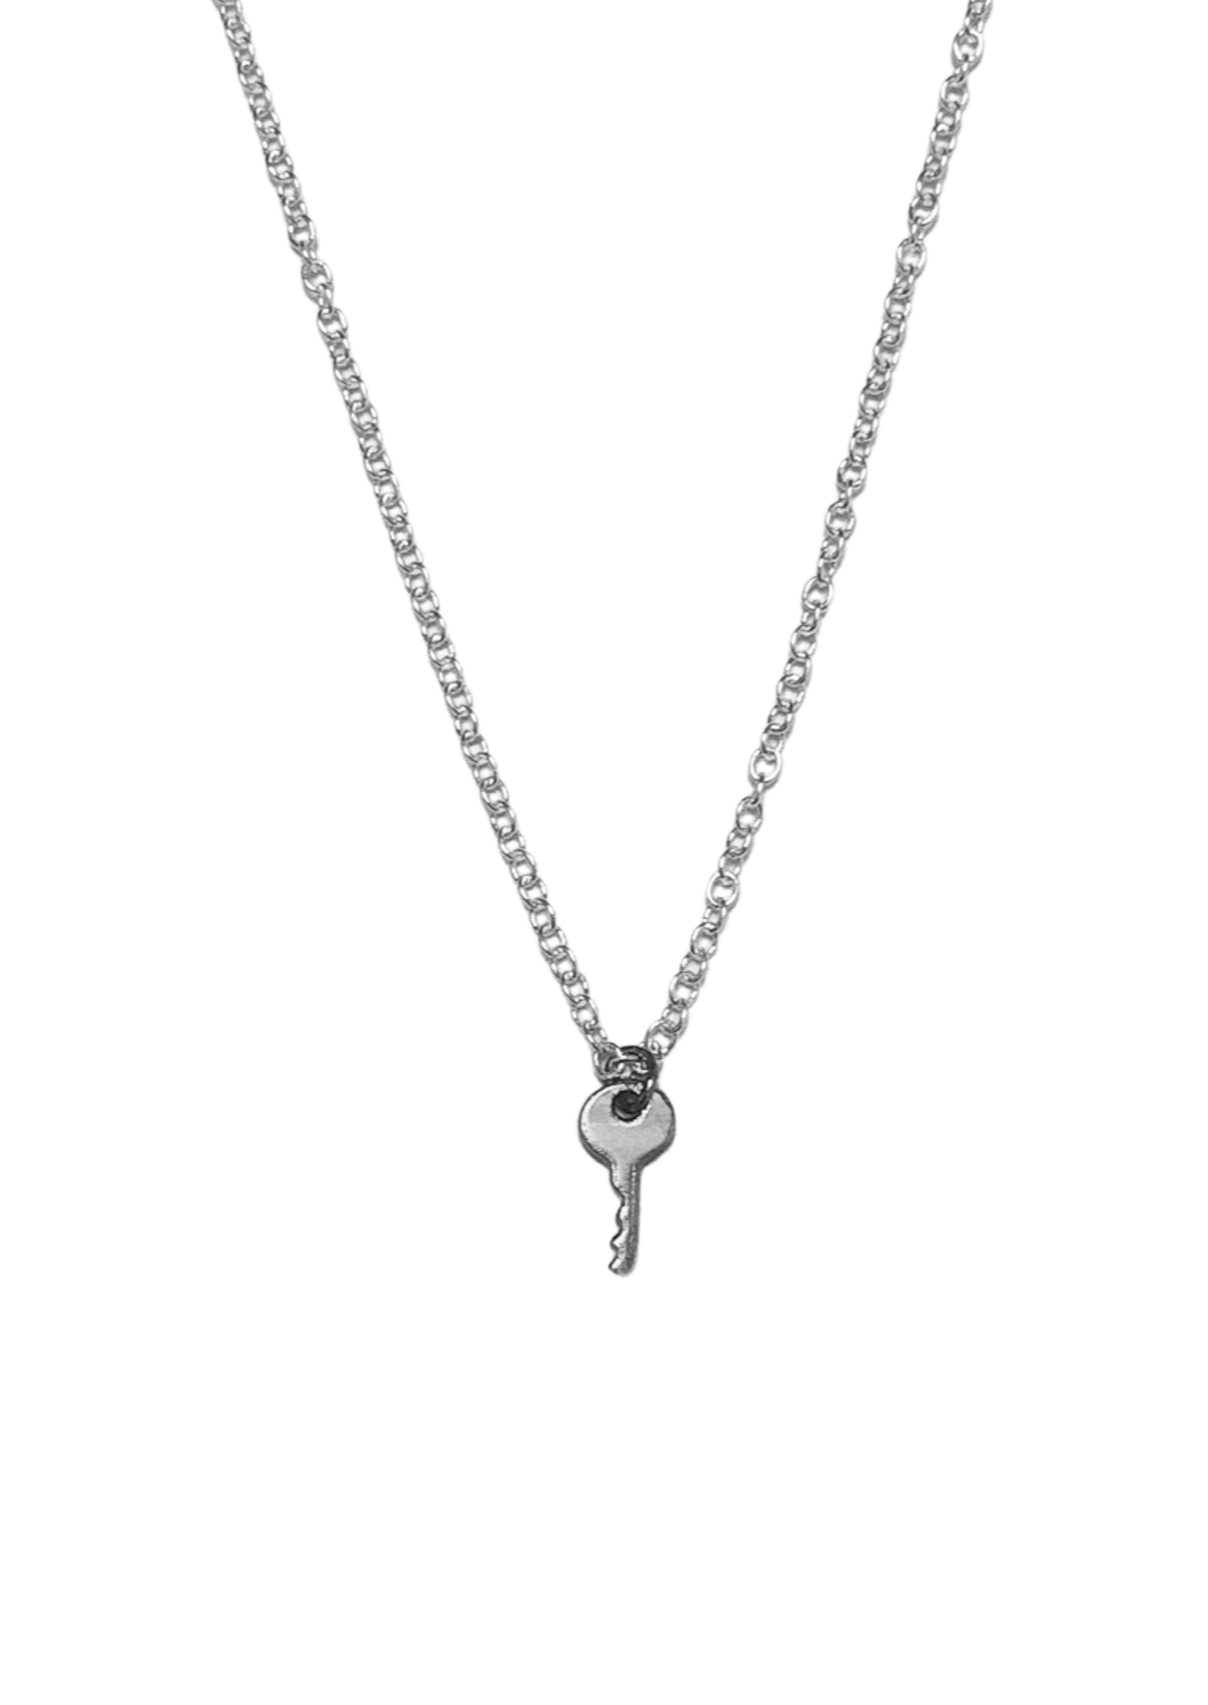 Key Charm Necklace - .925 Sterling Silver